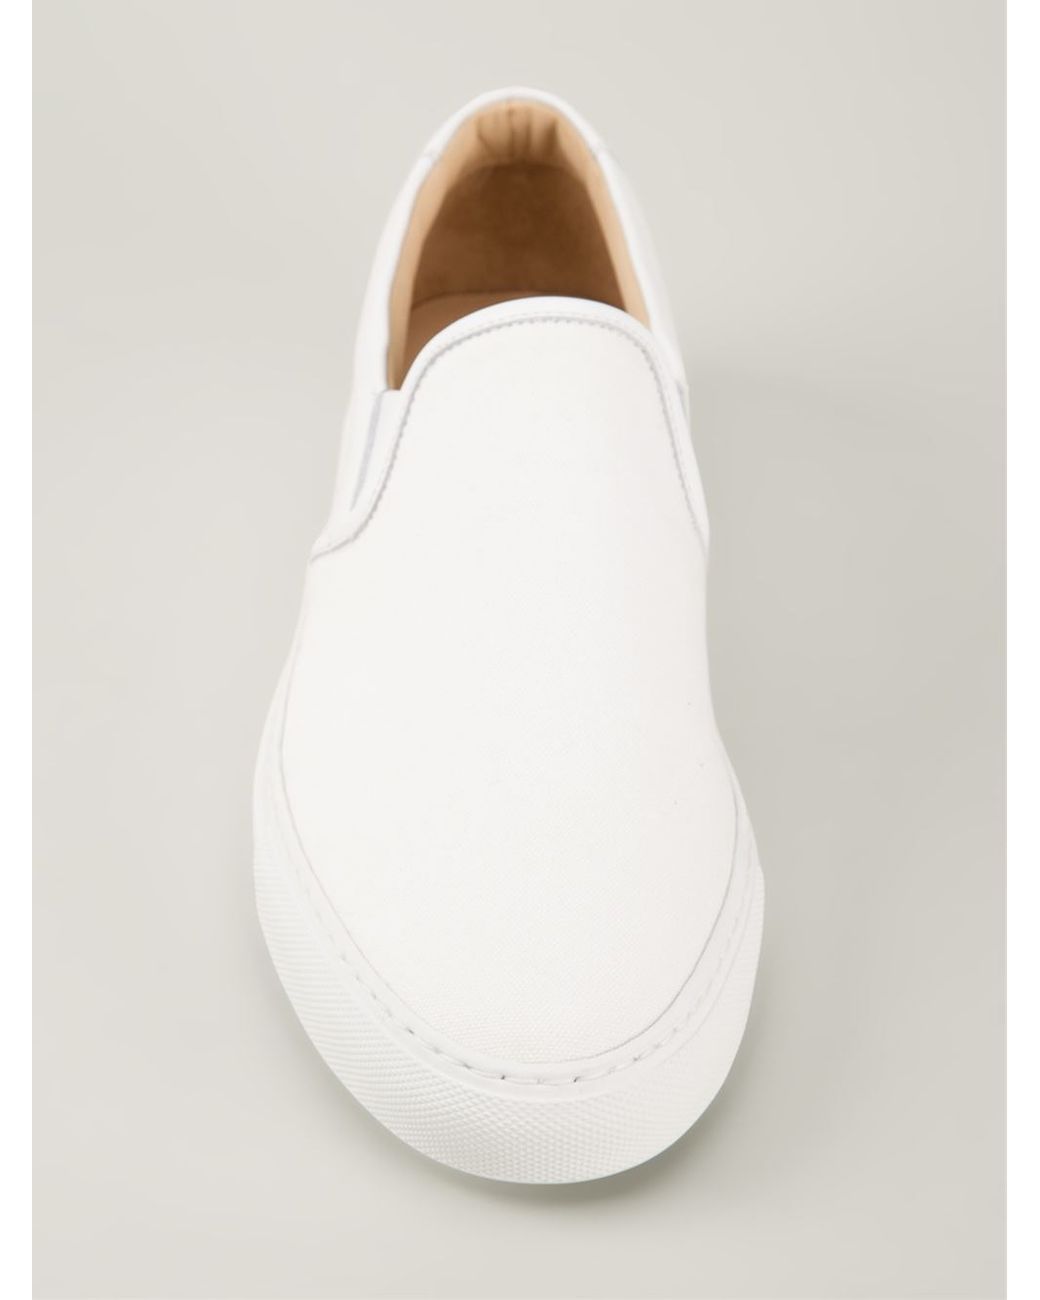 Common Projects Sneakers in White for Lyst